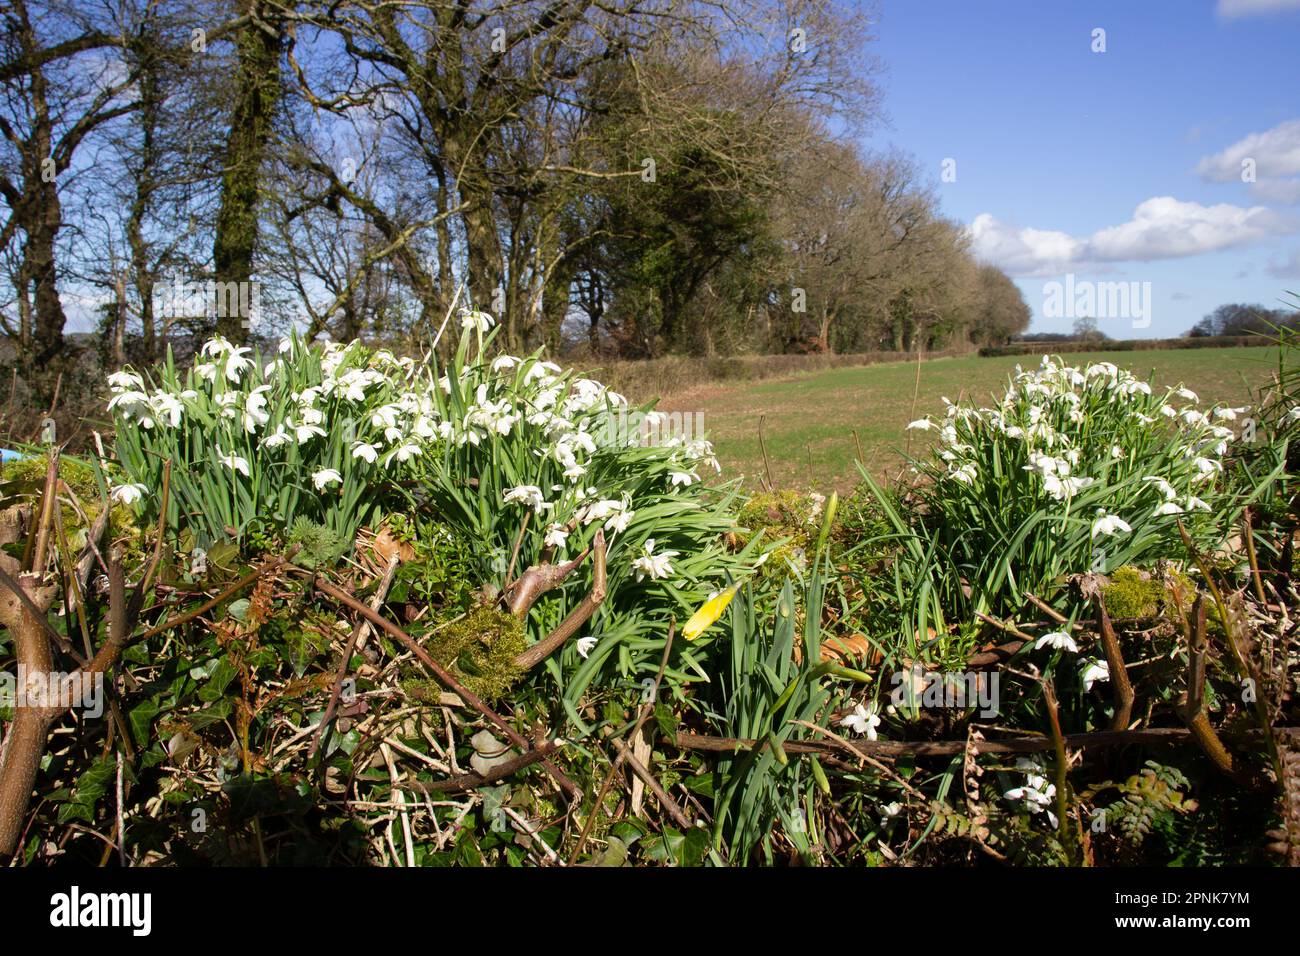 Snowdrops, Galanthus flowering on the top of a Devon bank with trees and a clear spring sky and white clouds Stock Photo